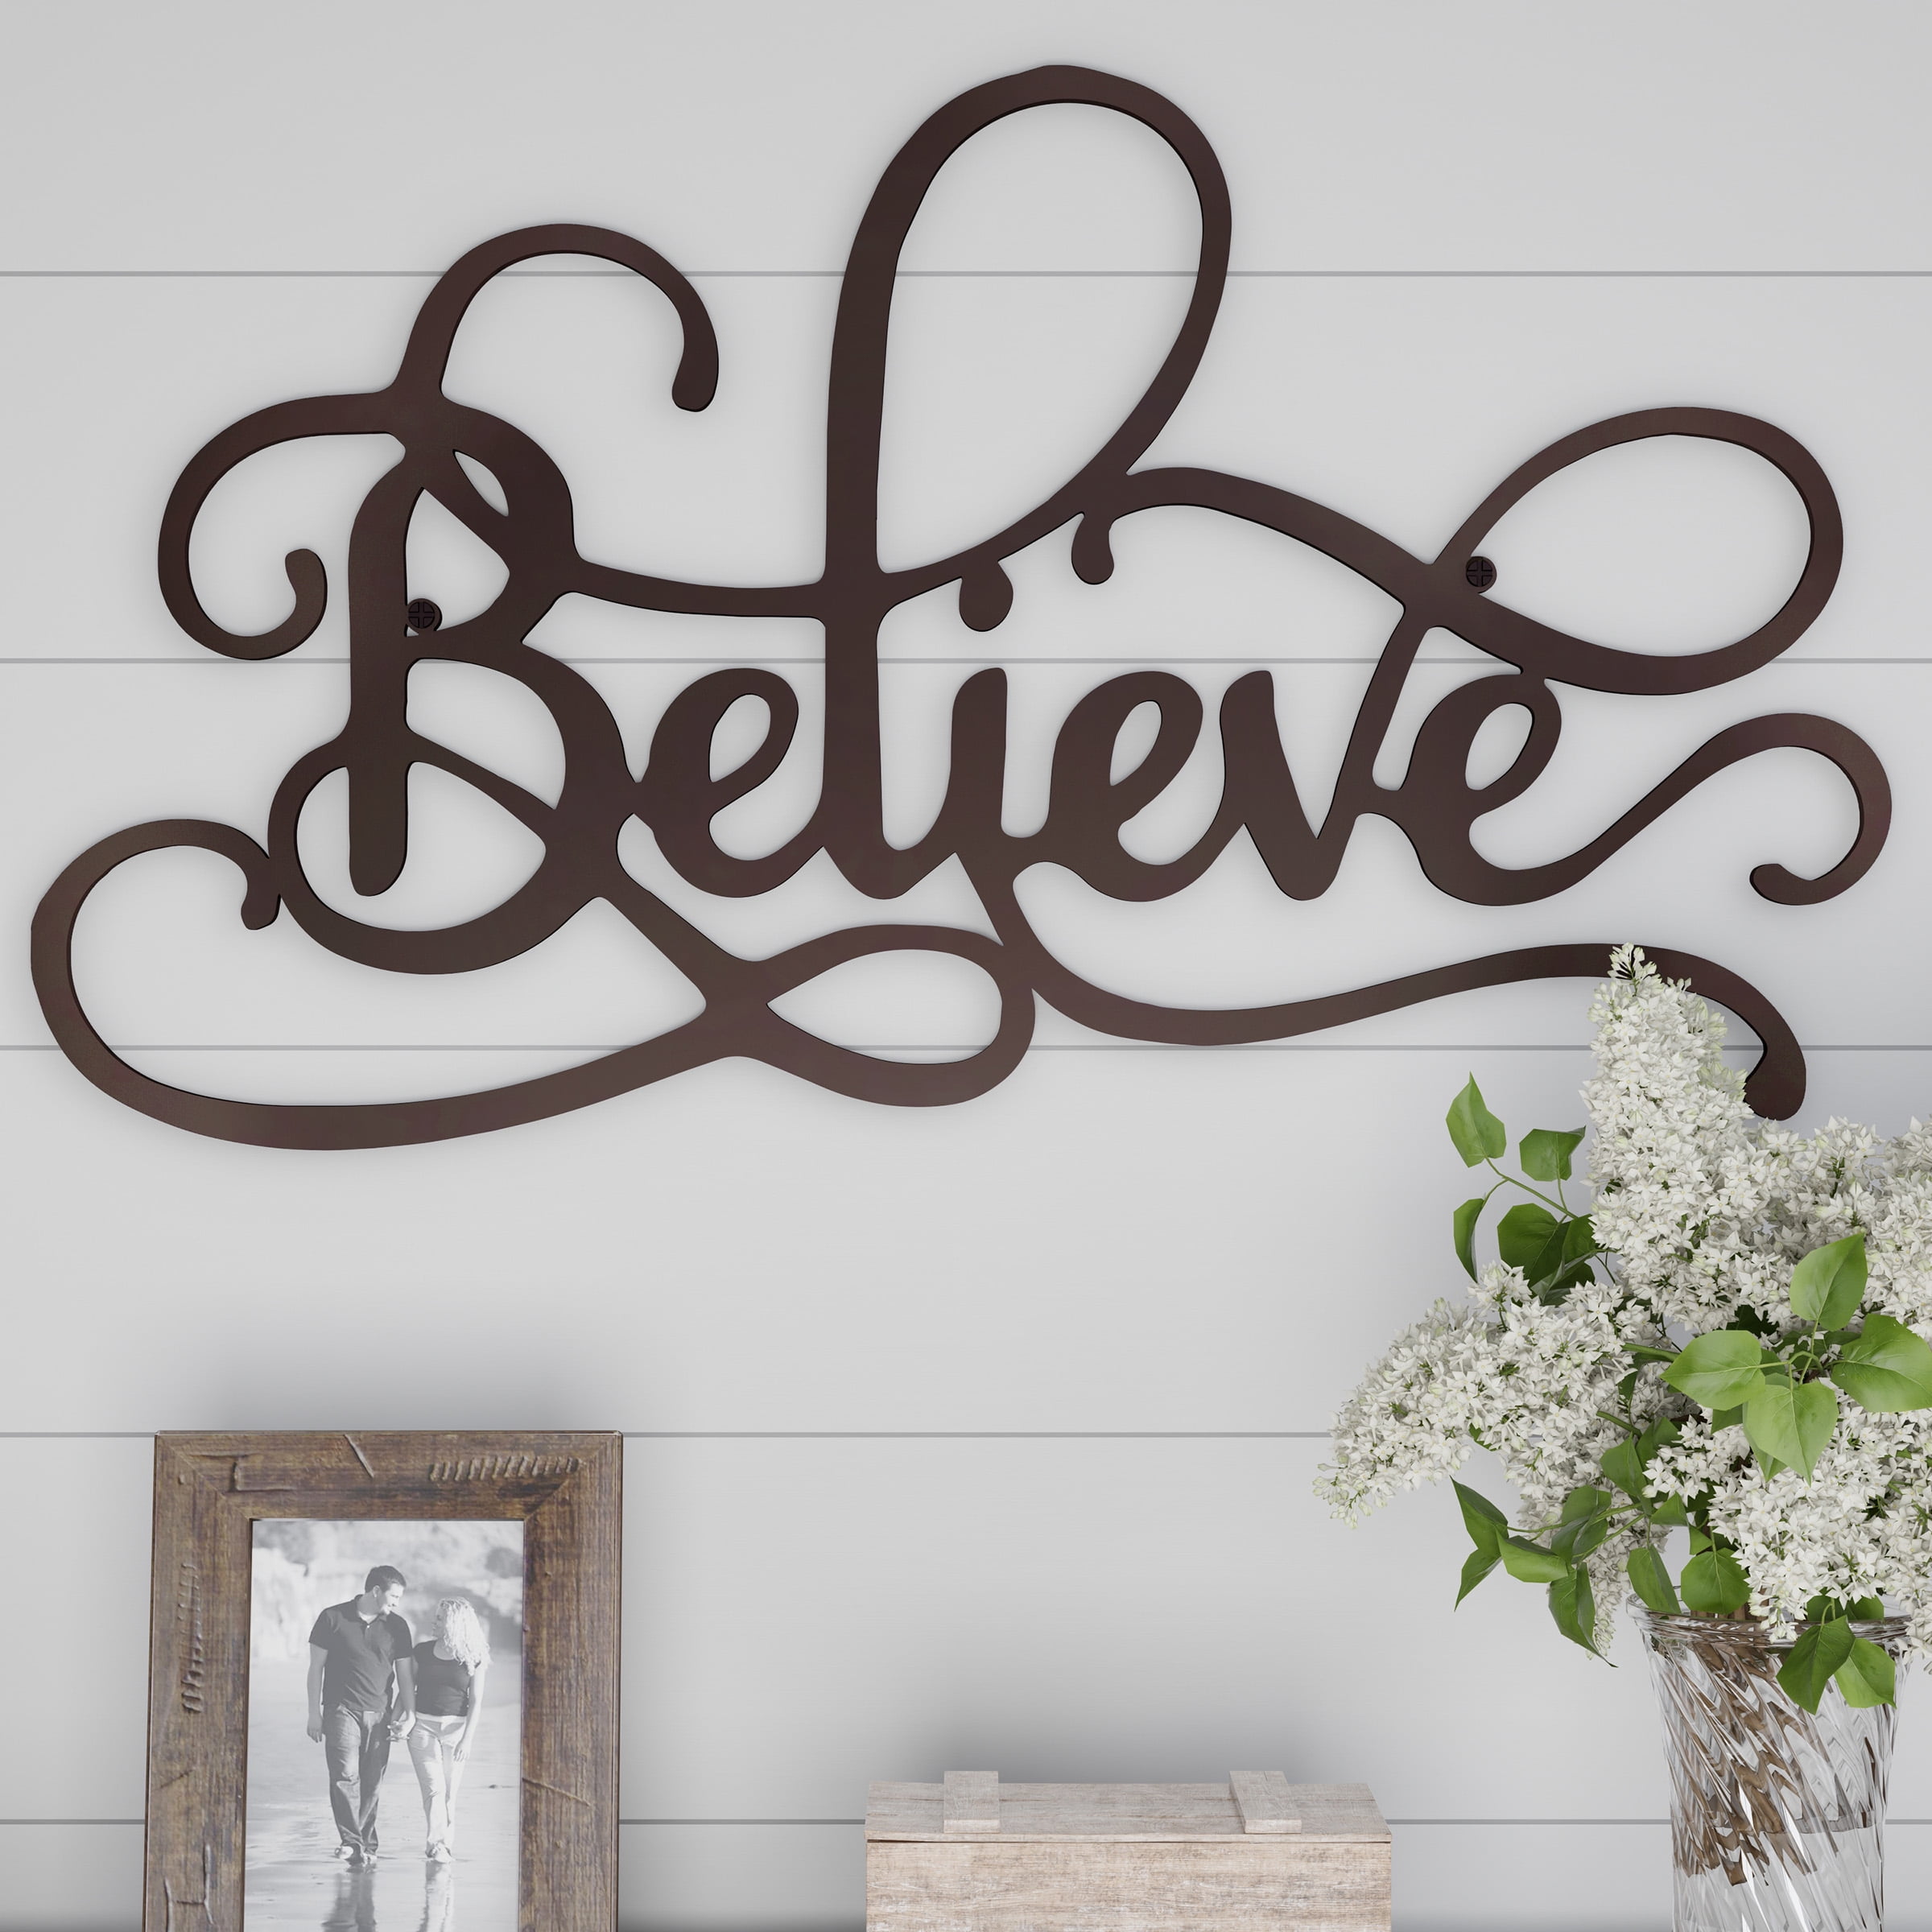 LARGE BELIEVE INSPIRATIONAL STEEL HOME DECOR WORD WALL ART SIGN  24" x 7" 